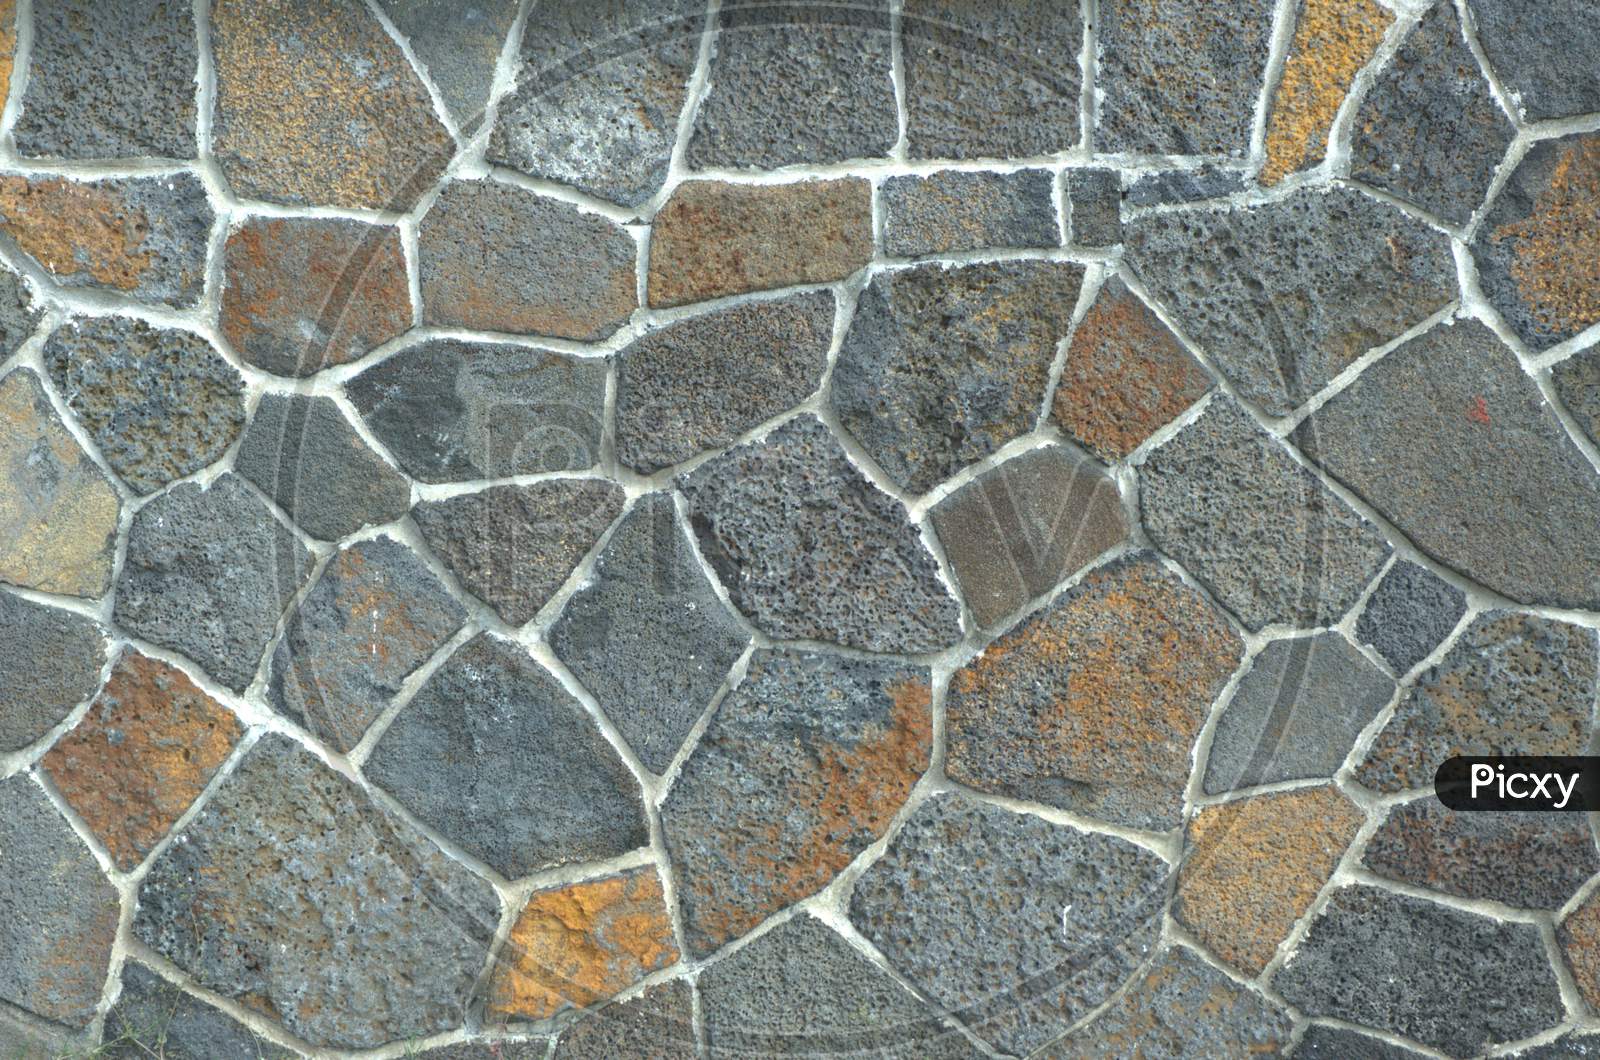 Patterns On a Wall With Stones